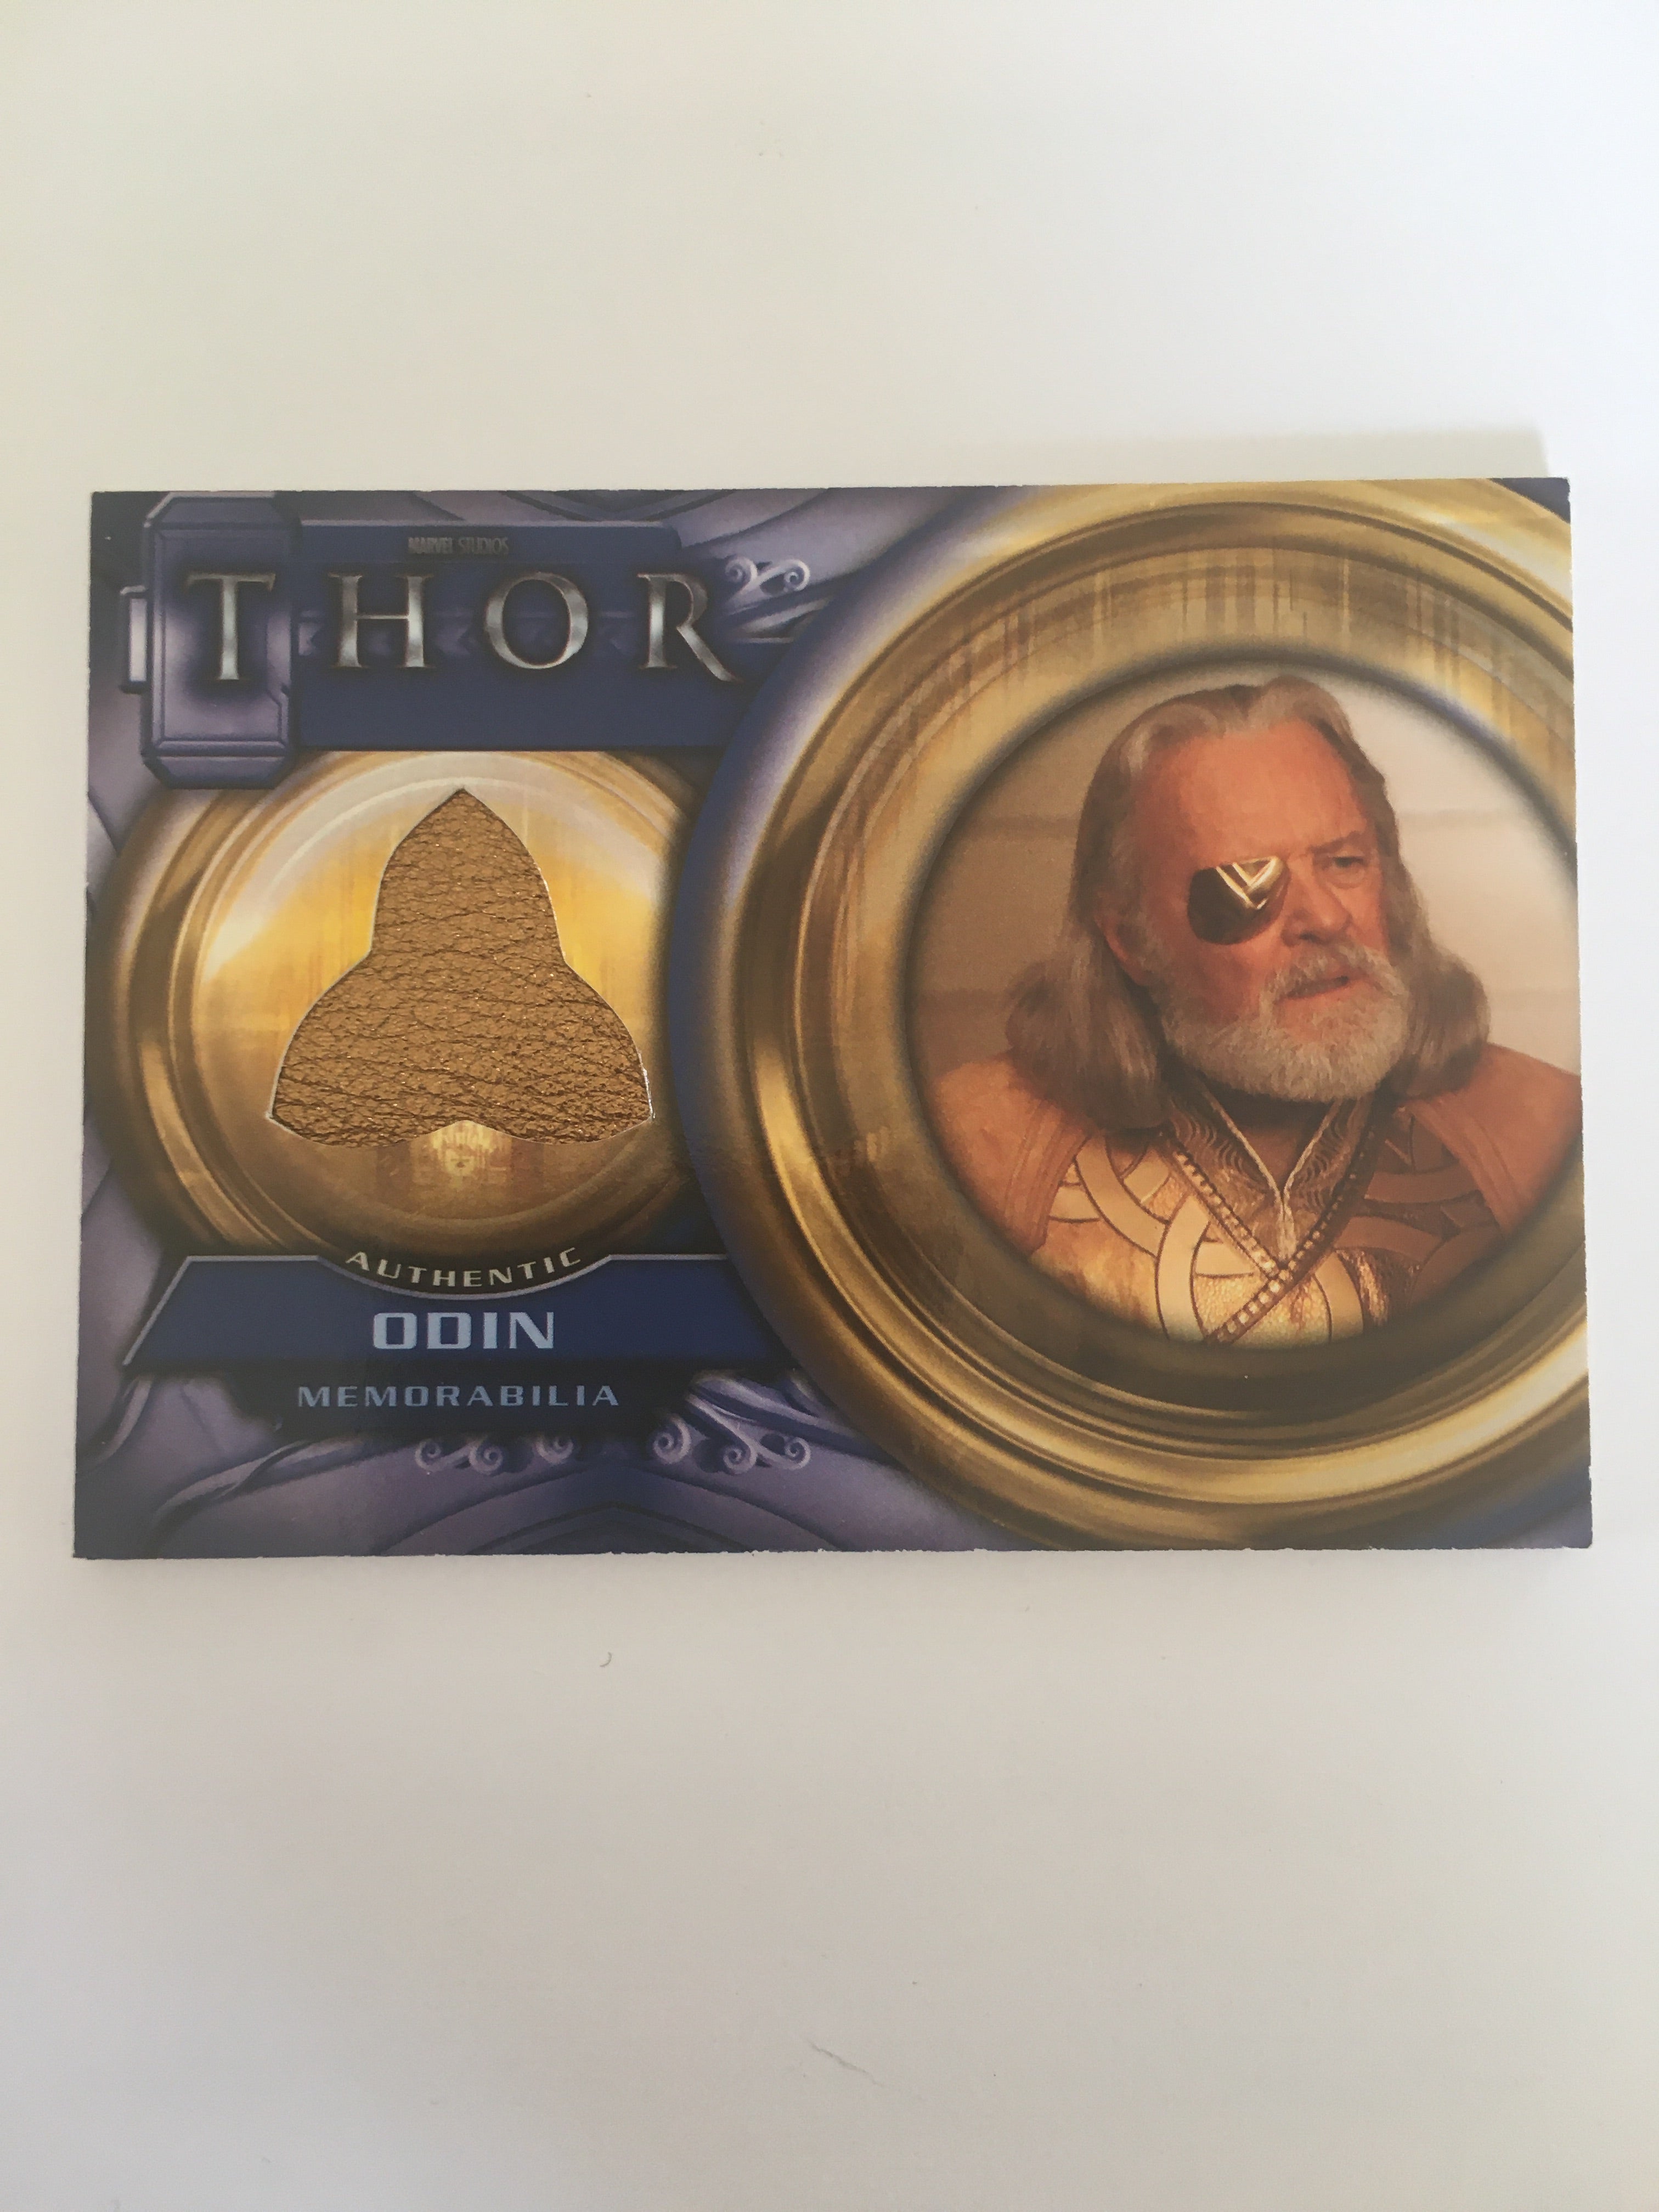 THOR COSTUME (ODIN) - Limited & Rare Trading Card